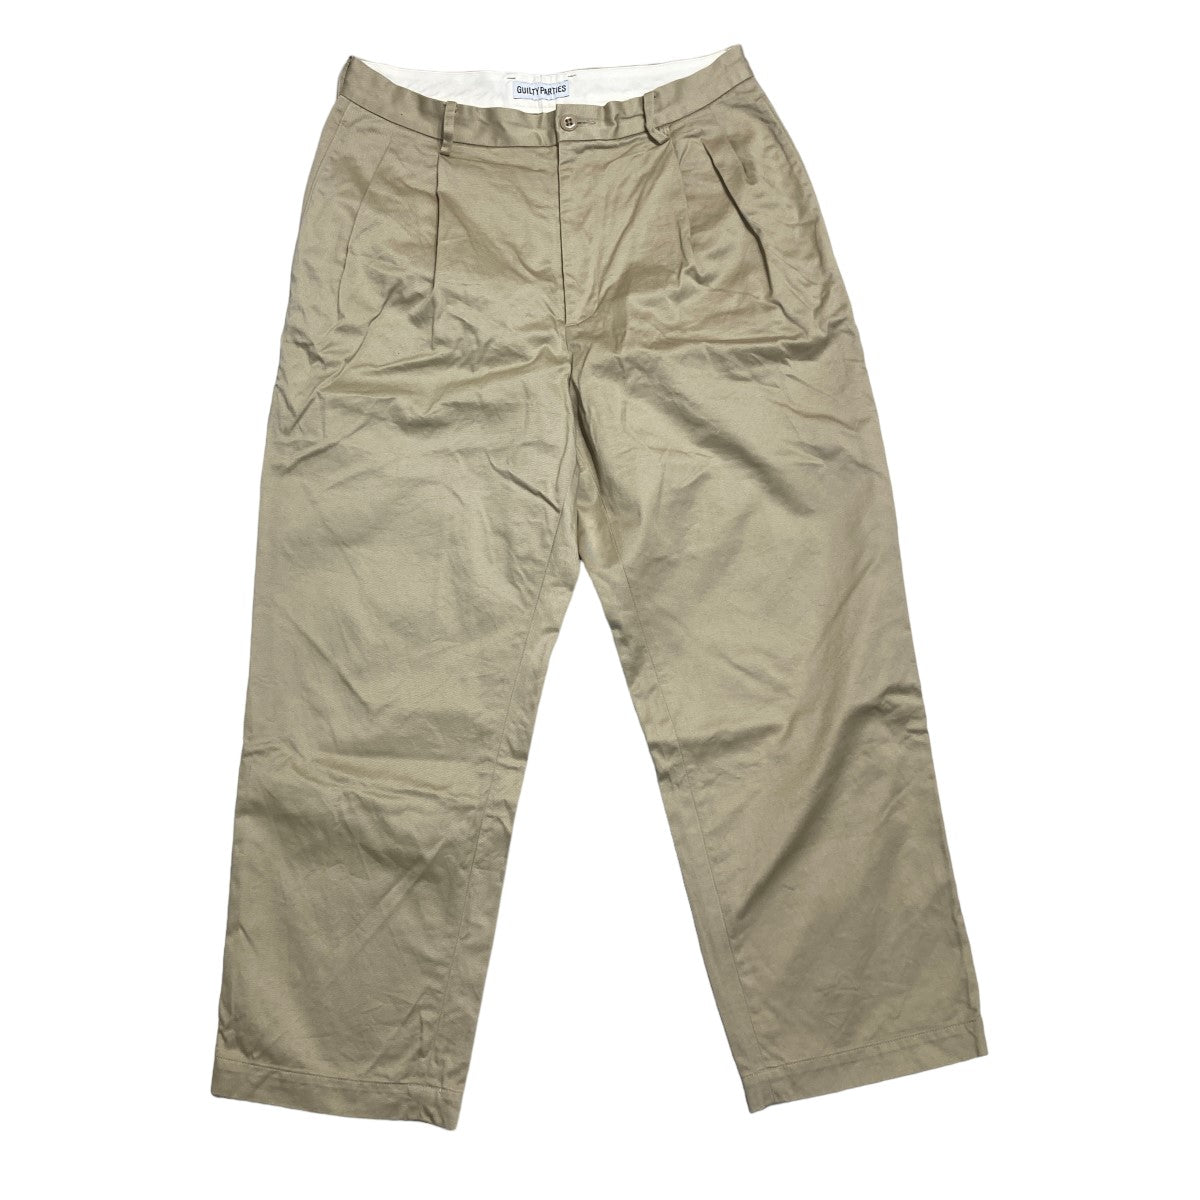 WACKO MARIA(ワコマリア) DOUBLE PLEATED CHINO TROUSERS 2タック 